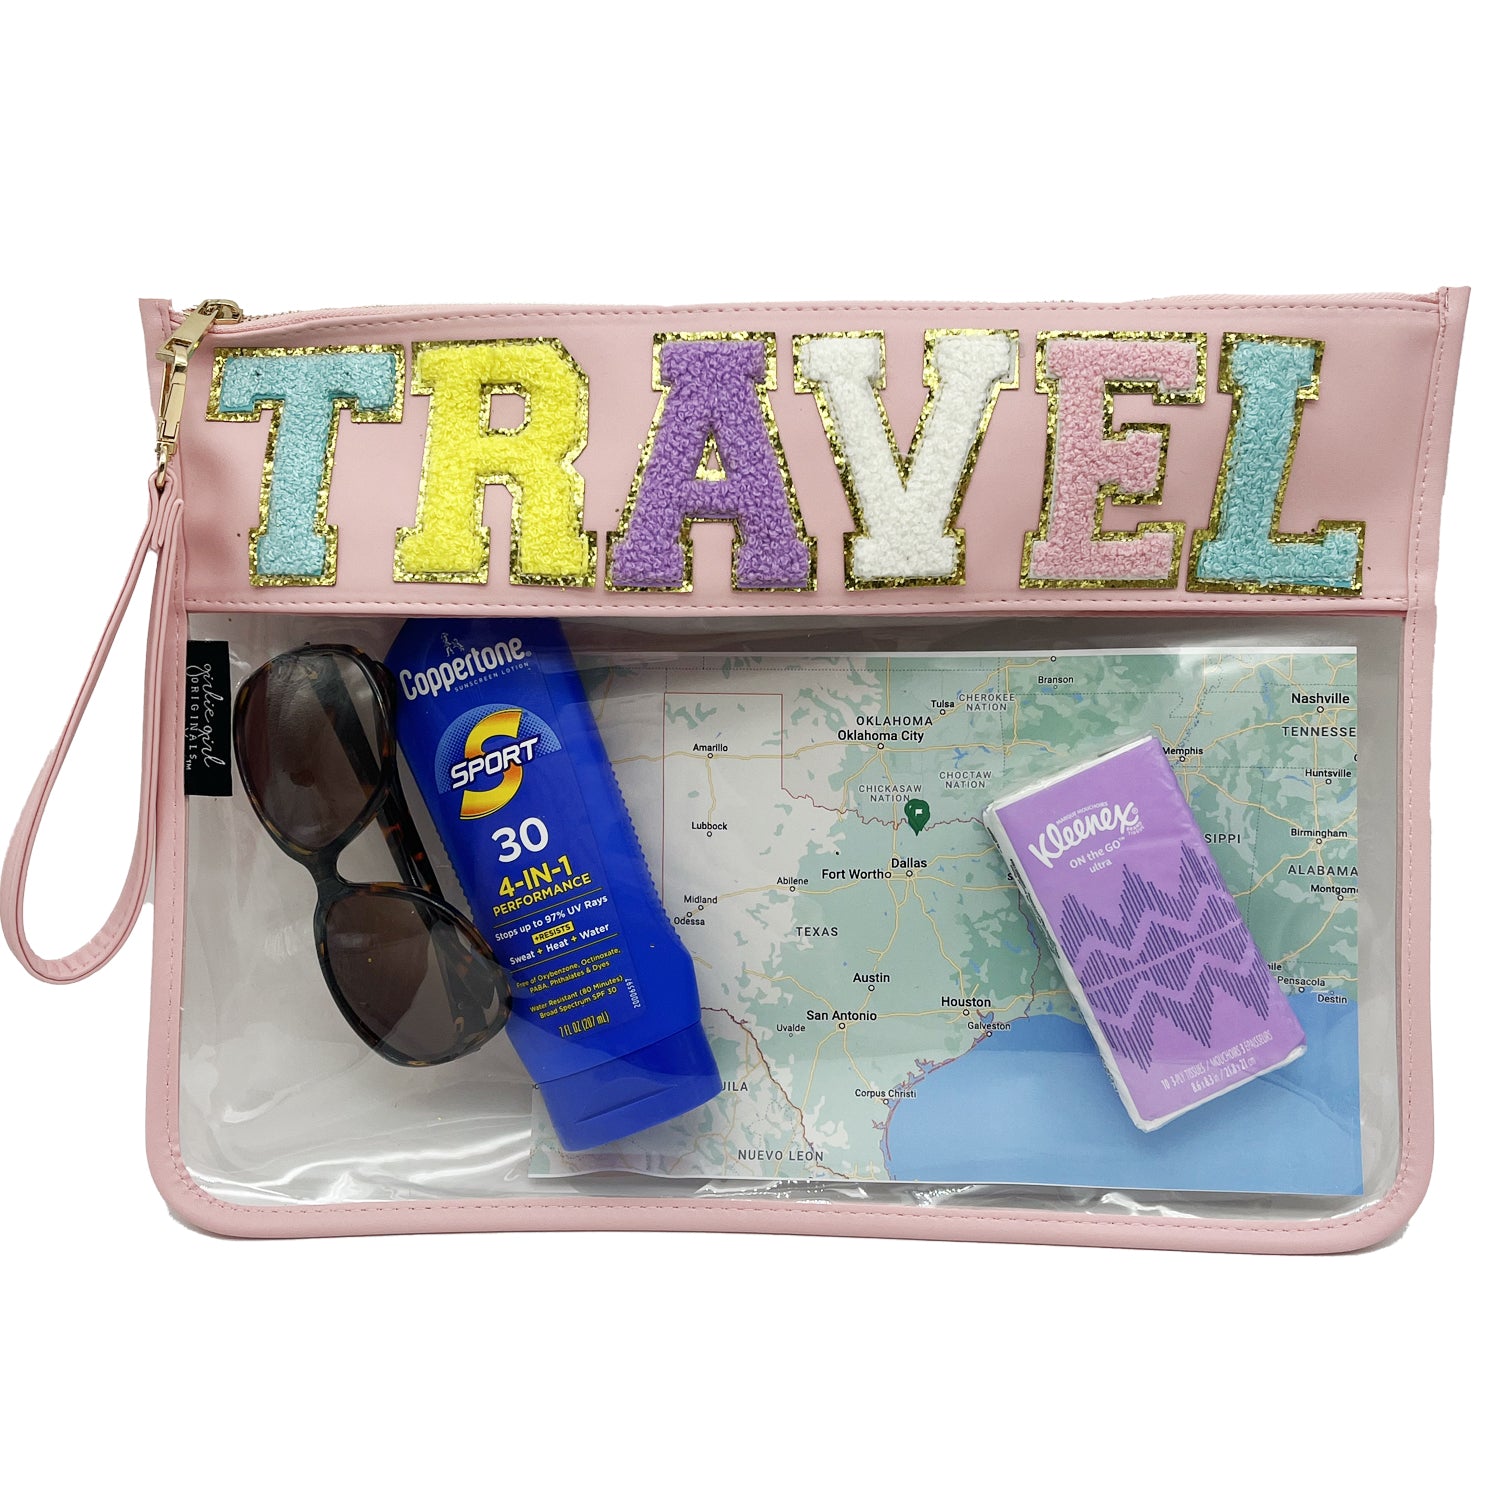 CP-1217 CANDY BAG TRAVEL PINK